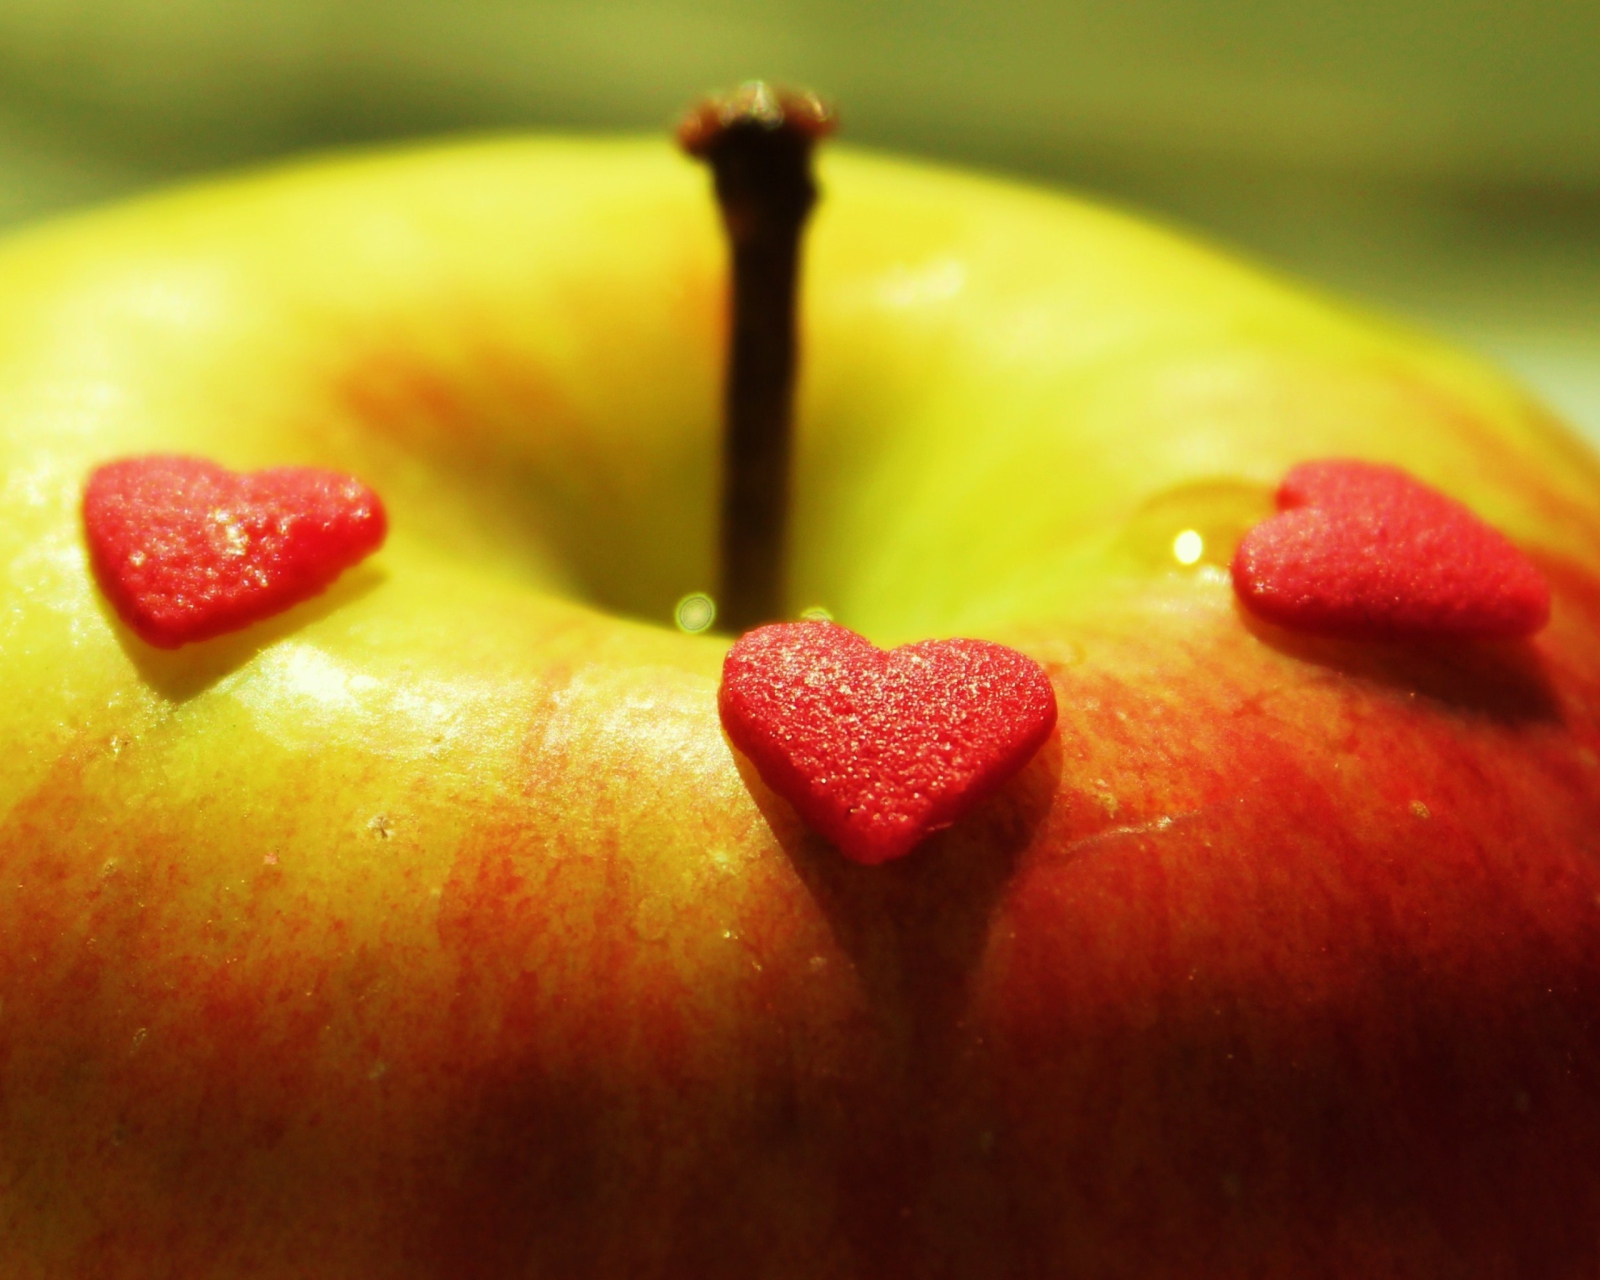 Heart And Apple wallpaper 1600x1280